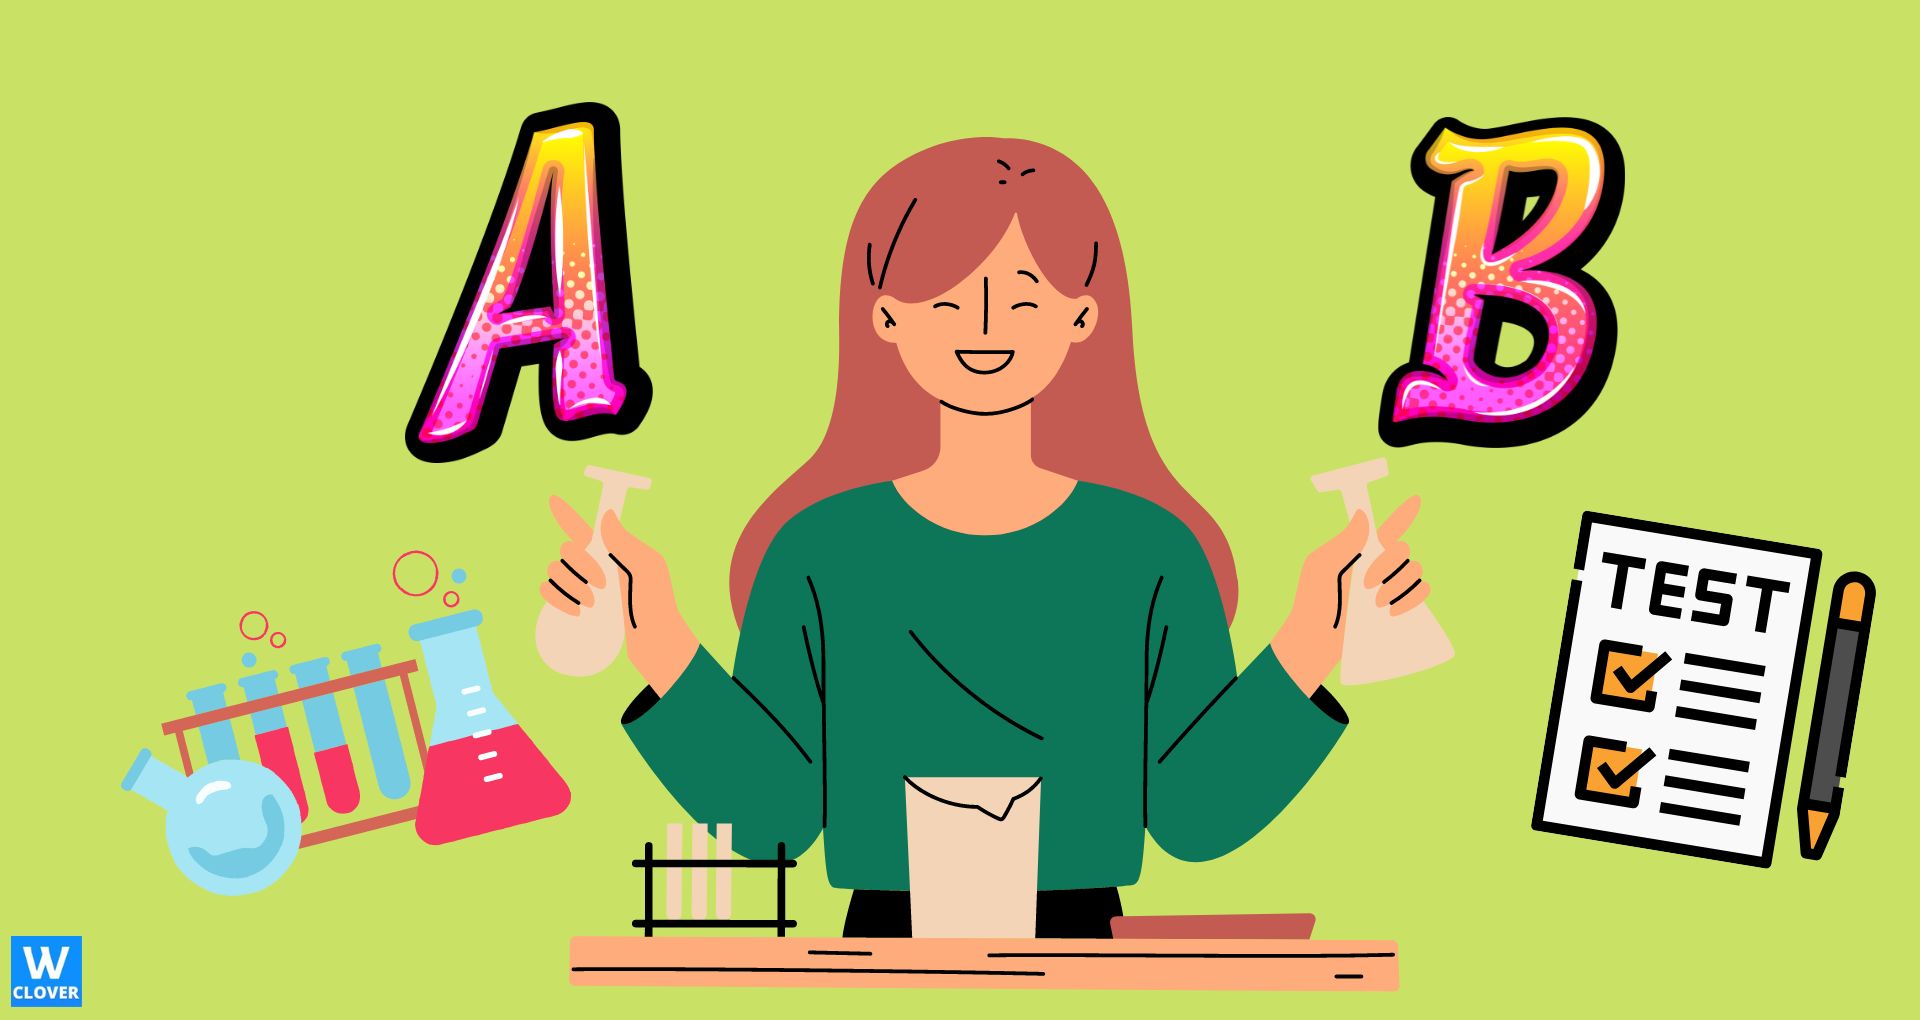 A/B Testing graphics of girl with letter A and B in each hand on green background